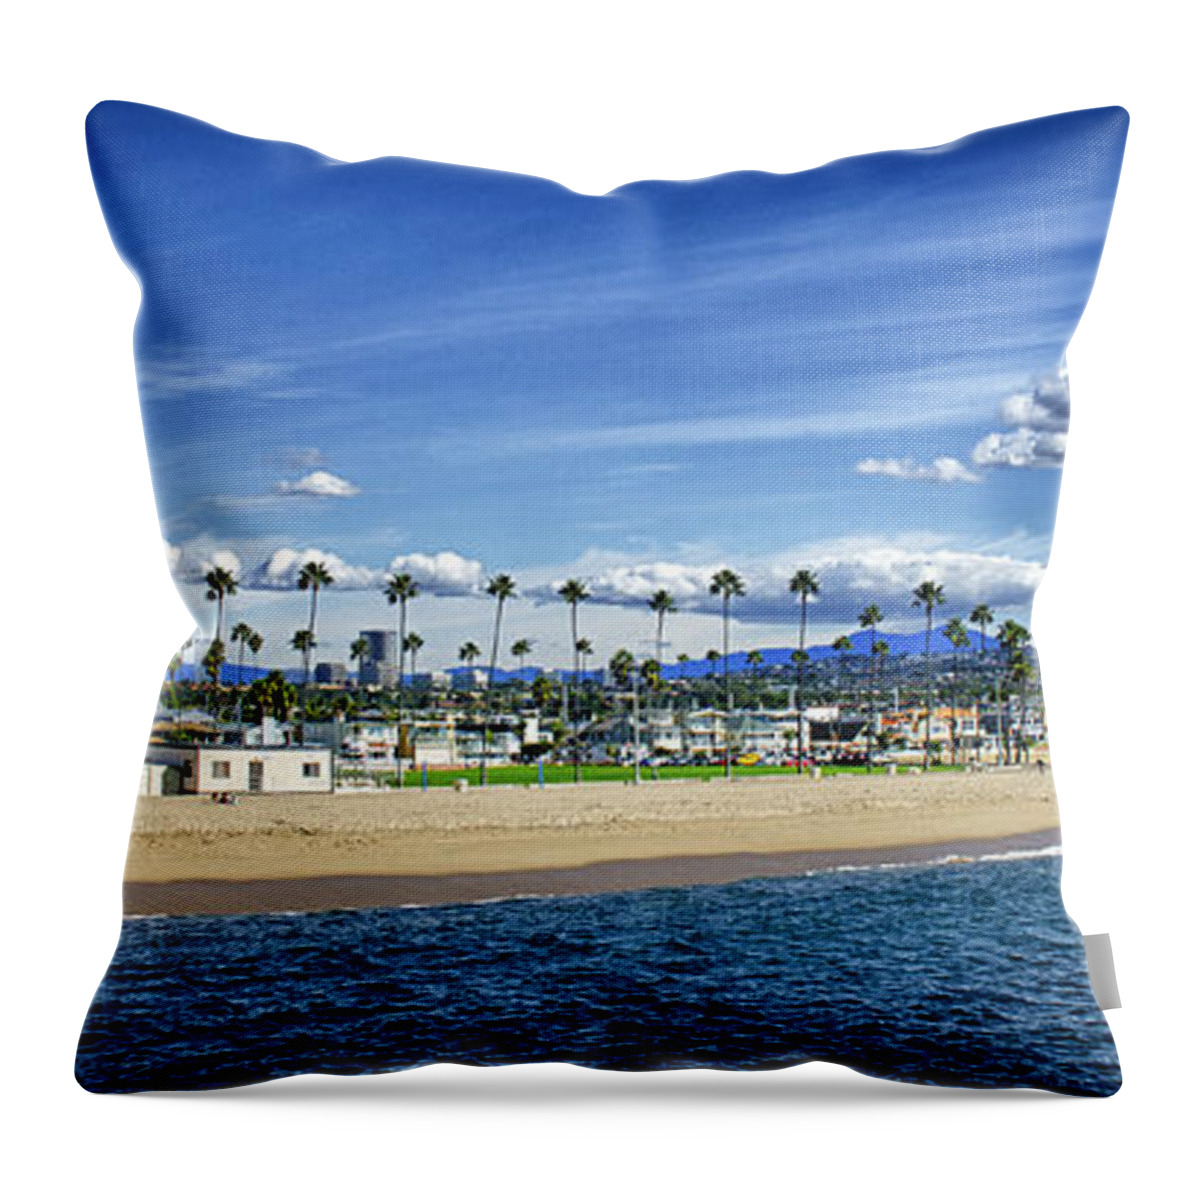  Throw Pillow featuring the photograph Cloud Formation by Joseph Hollingsworth